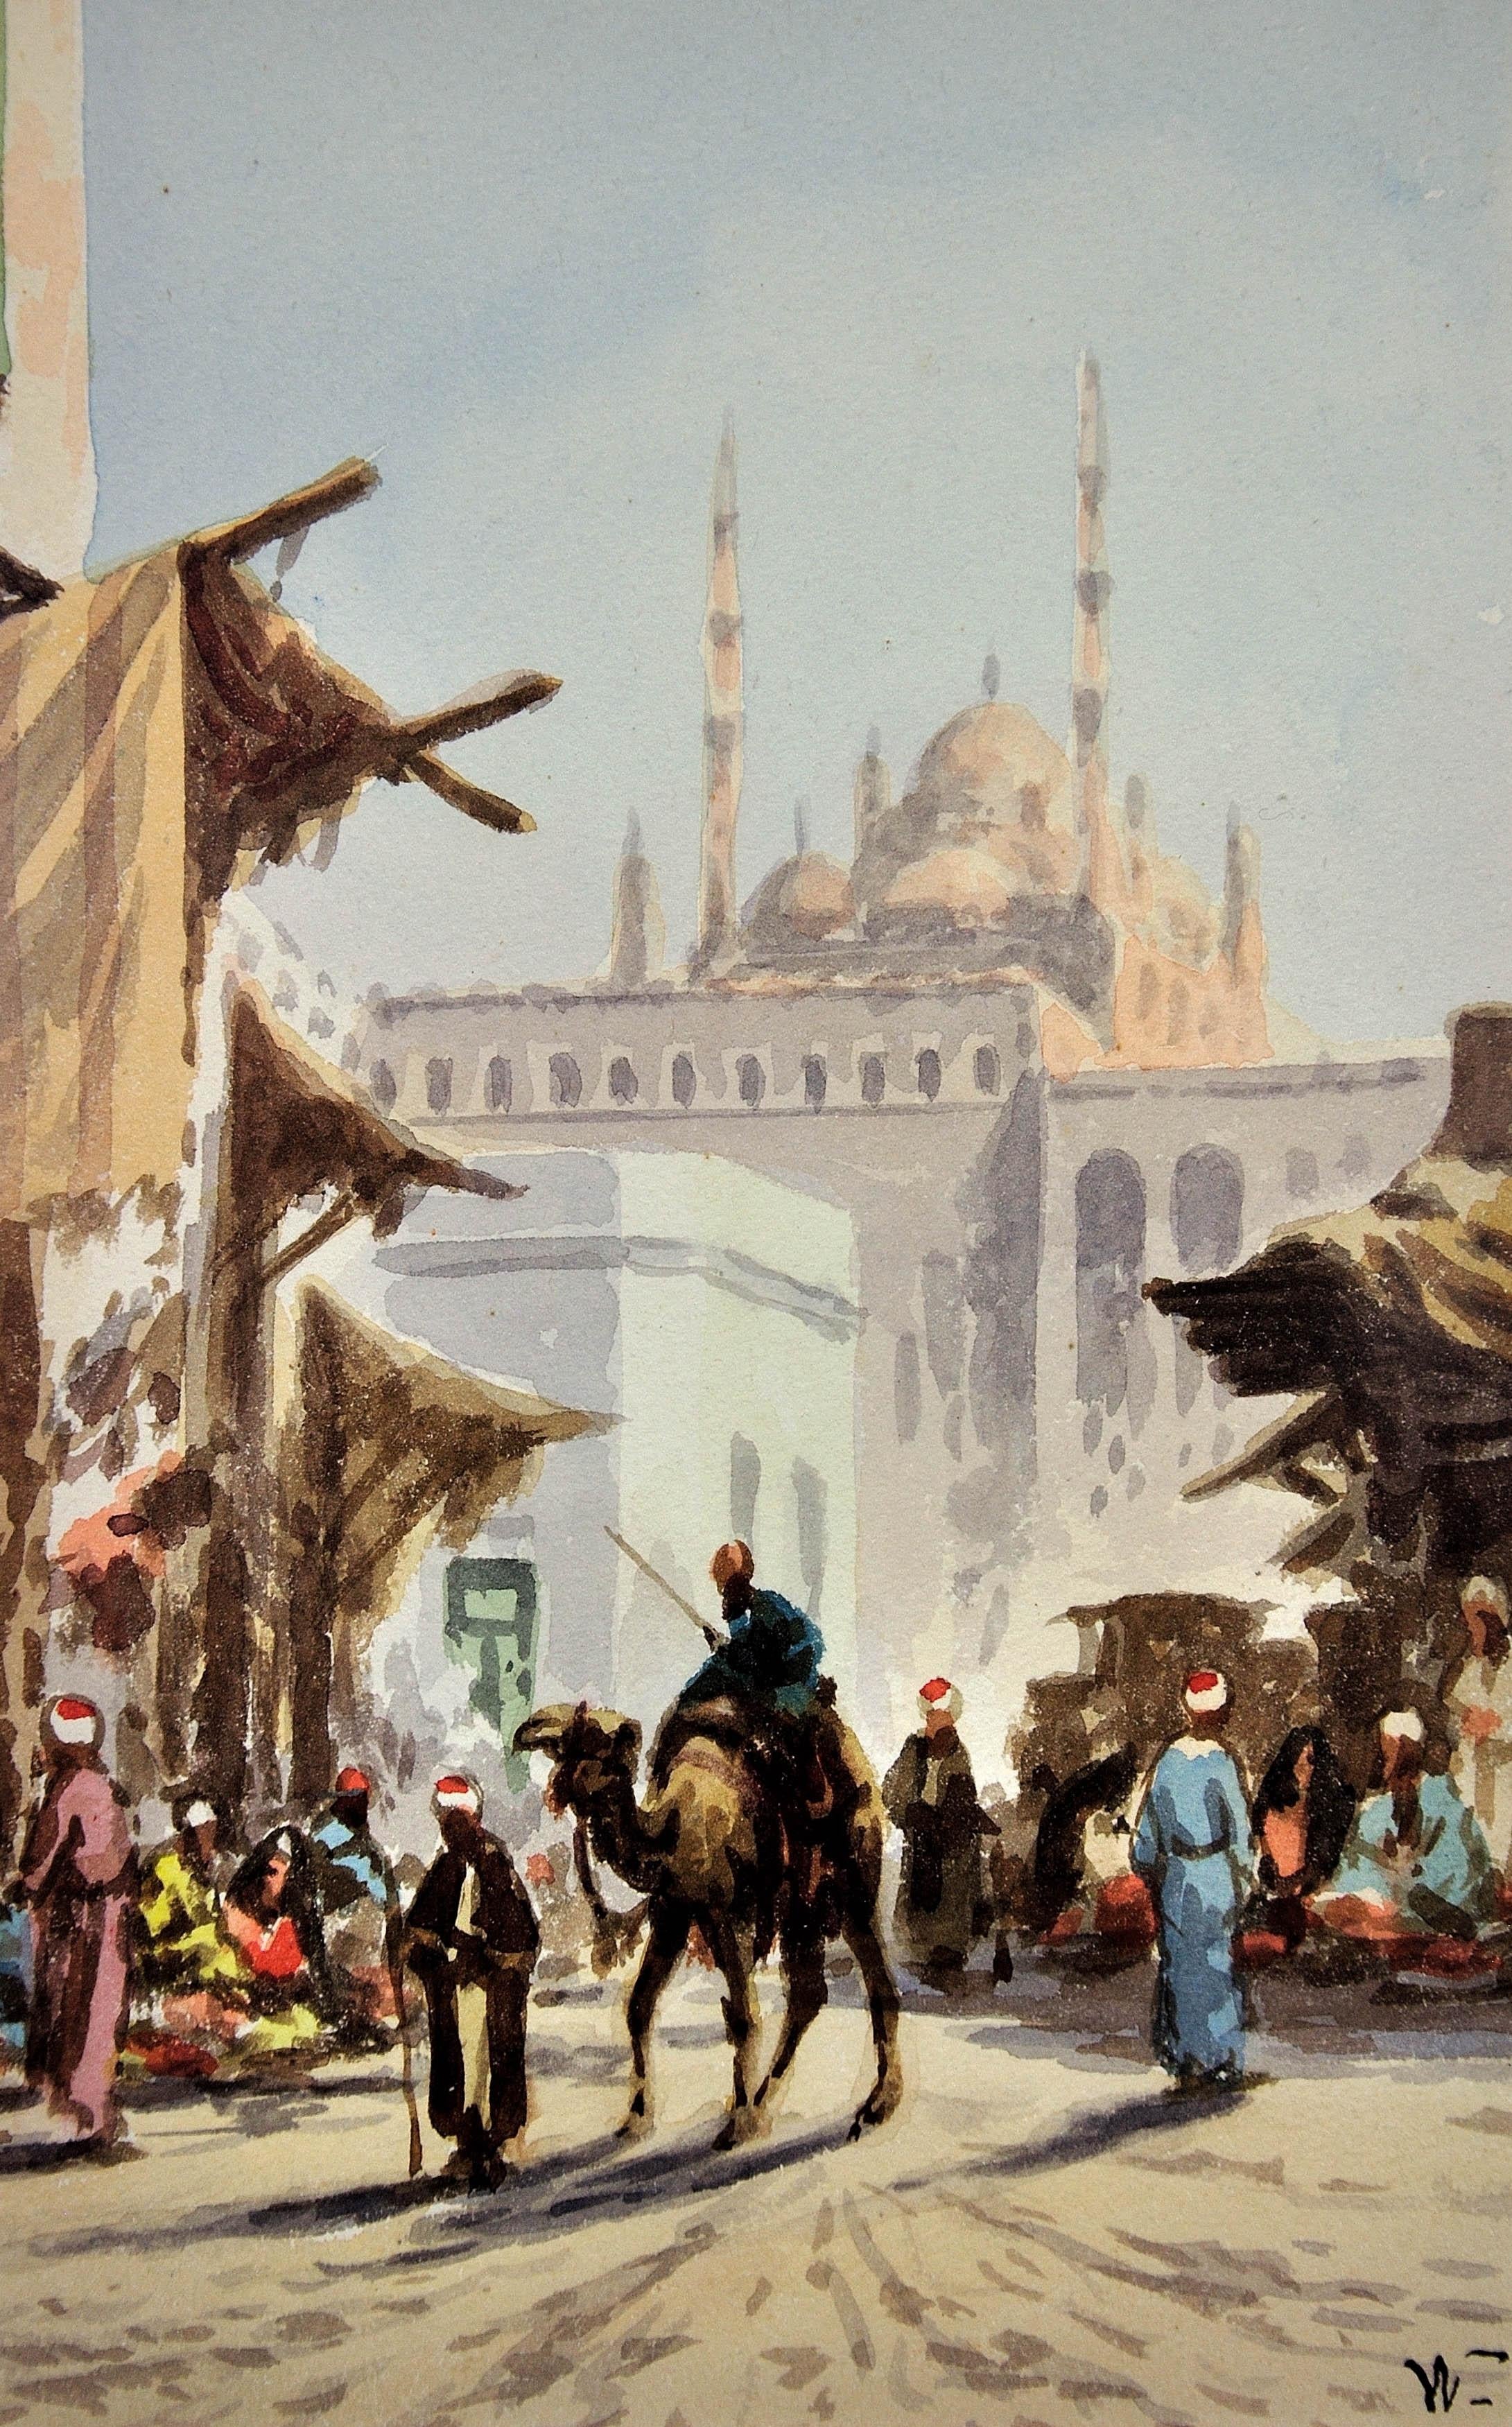 The Citadel, Cairo, The Great Mosque of Muhammad Ali Pasha. American Orientalist - Art by Edwin Lord Weeks